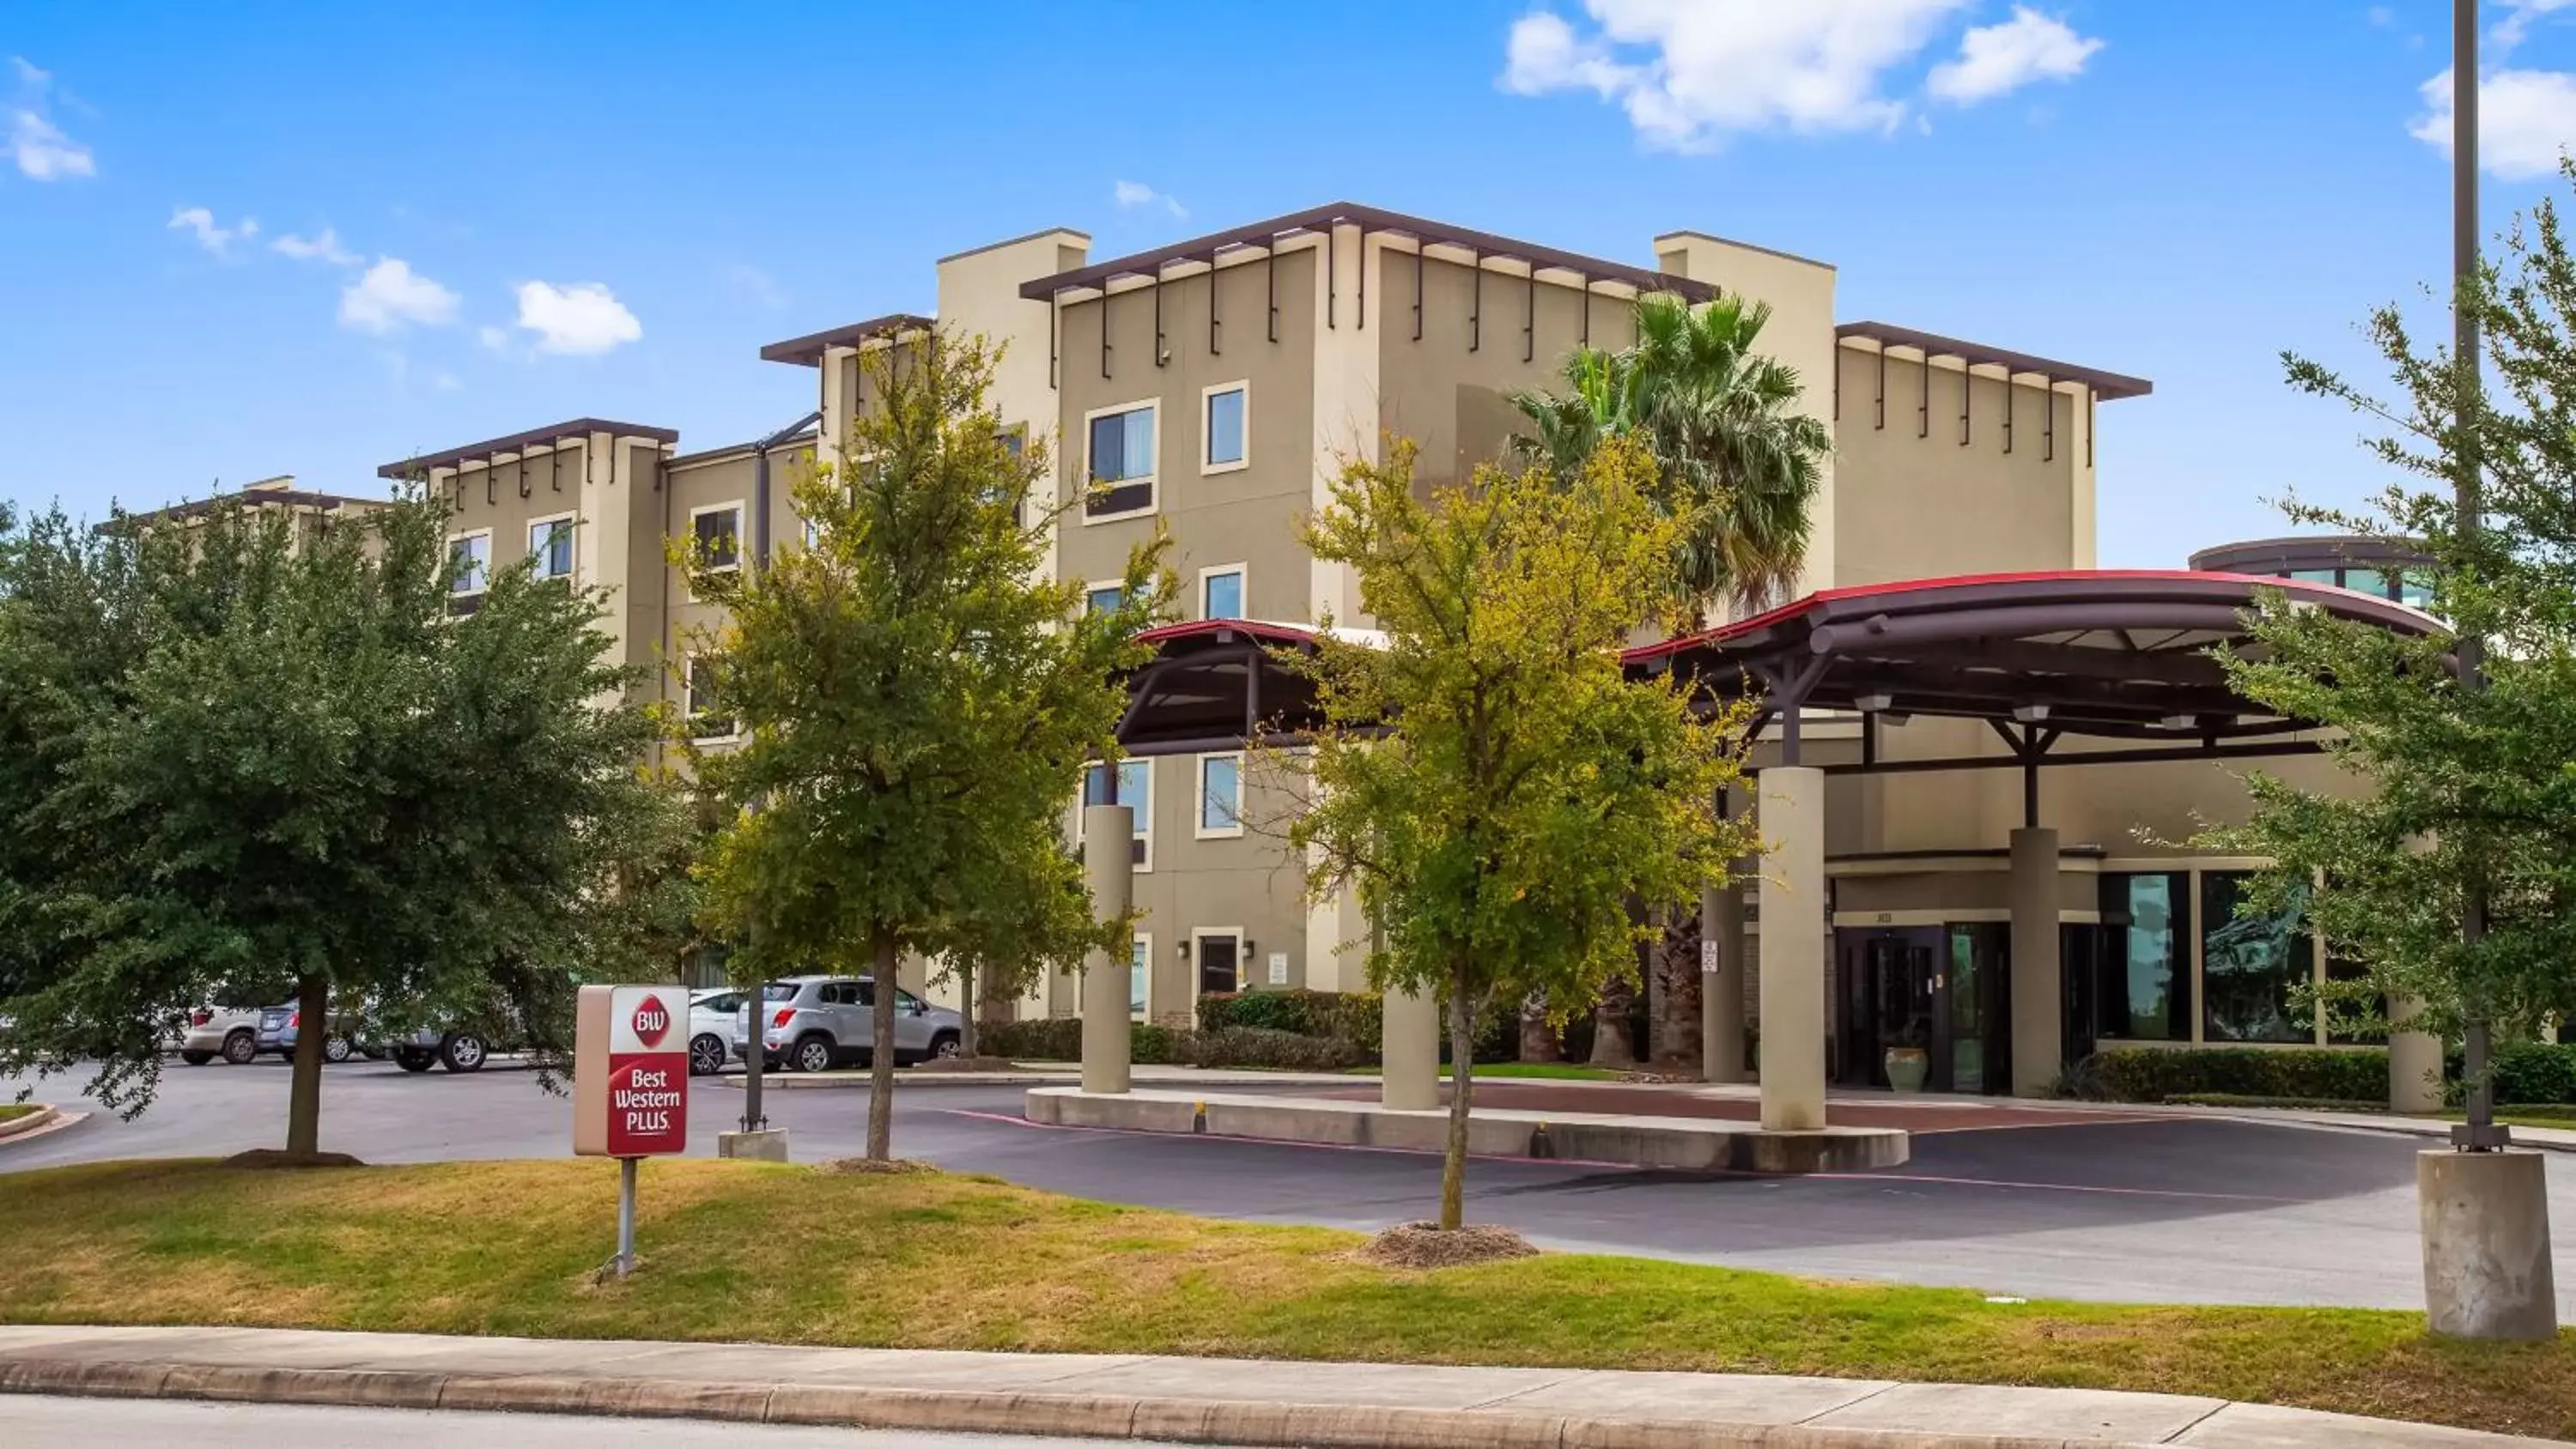 Property Building in Best Western Plus Lackland Hotel and Suites.